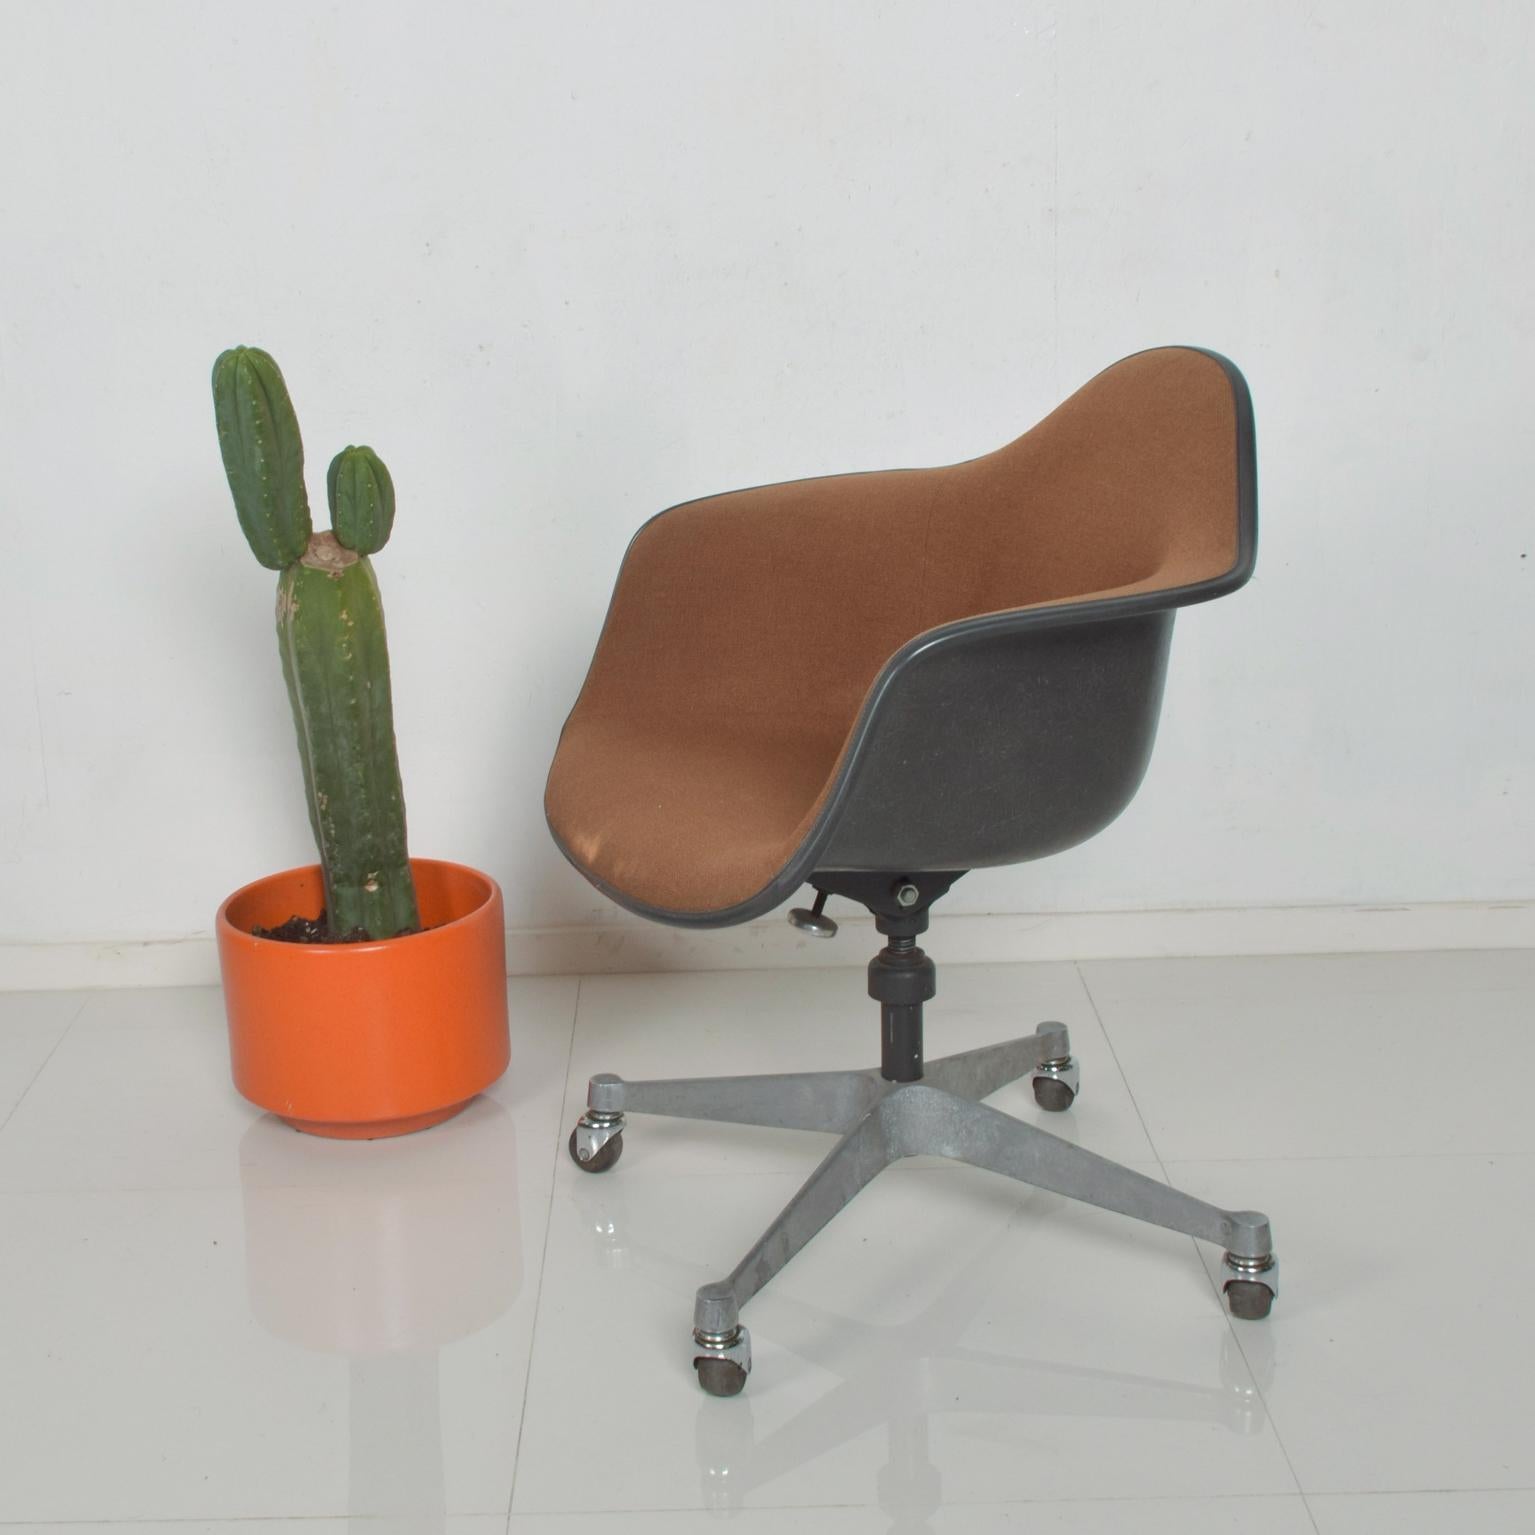 We are pleased to offer for your consideration a vintage Herman Miller Office Bucket chair. Aluminum base with rolling casters. Original brown upholstery.

Made in the USA, circa 1960s.

The chair retains all the labels